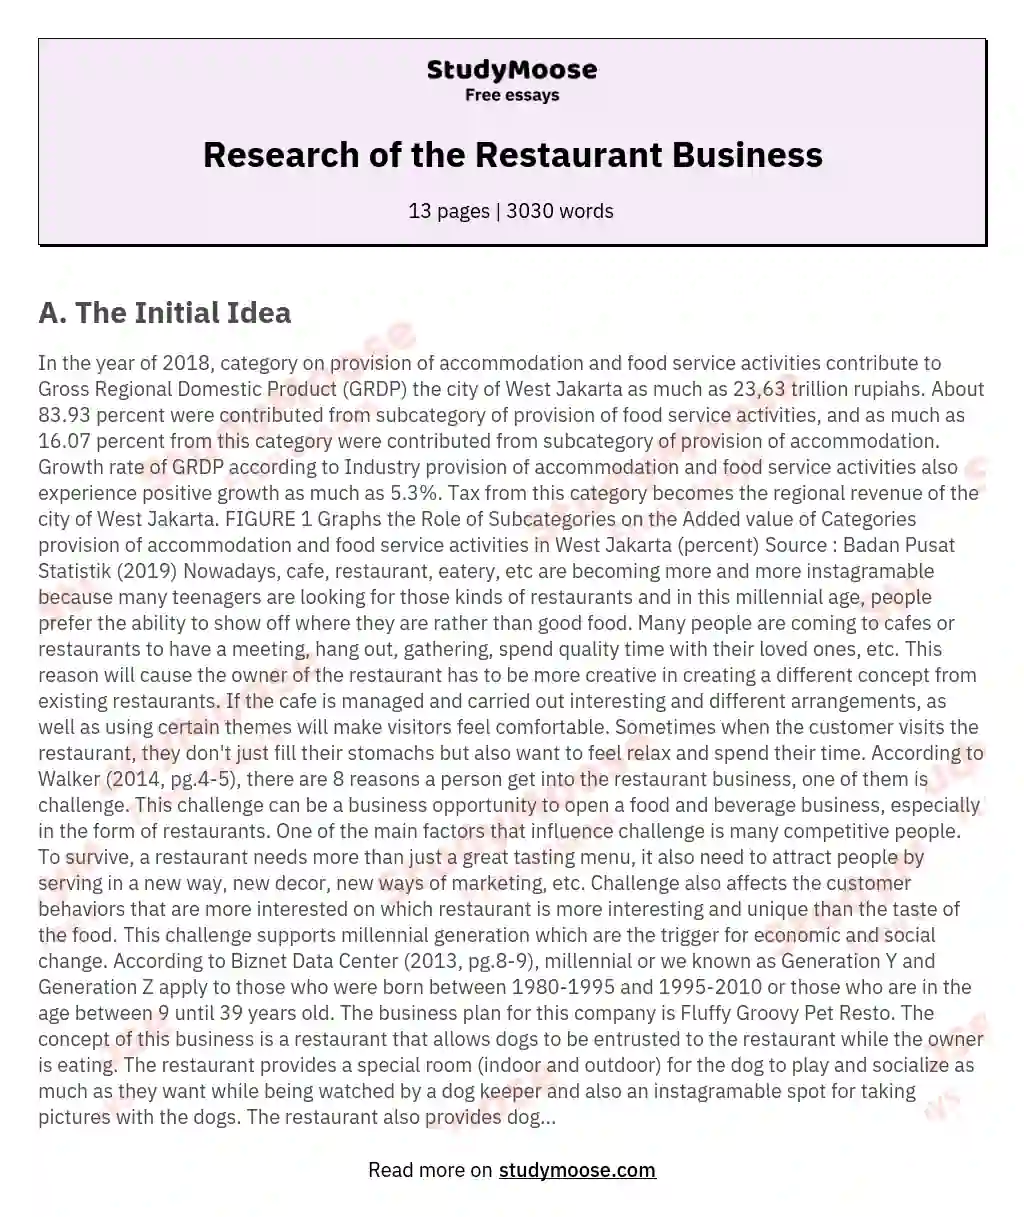 Research of the Restaurant Business essay